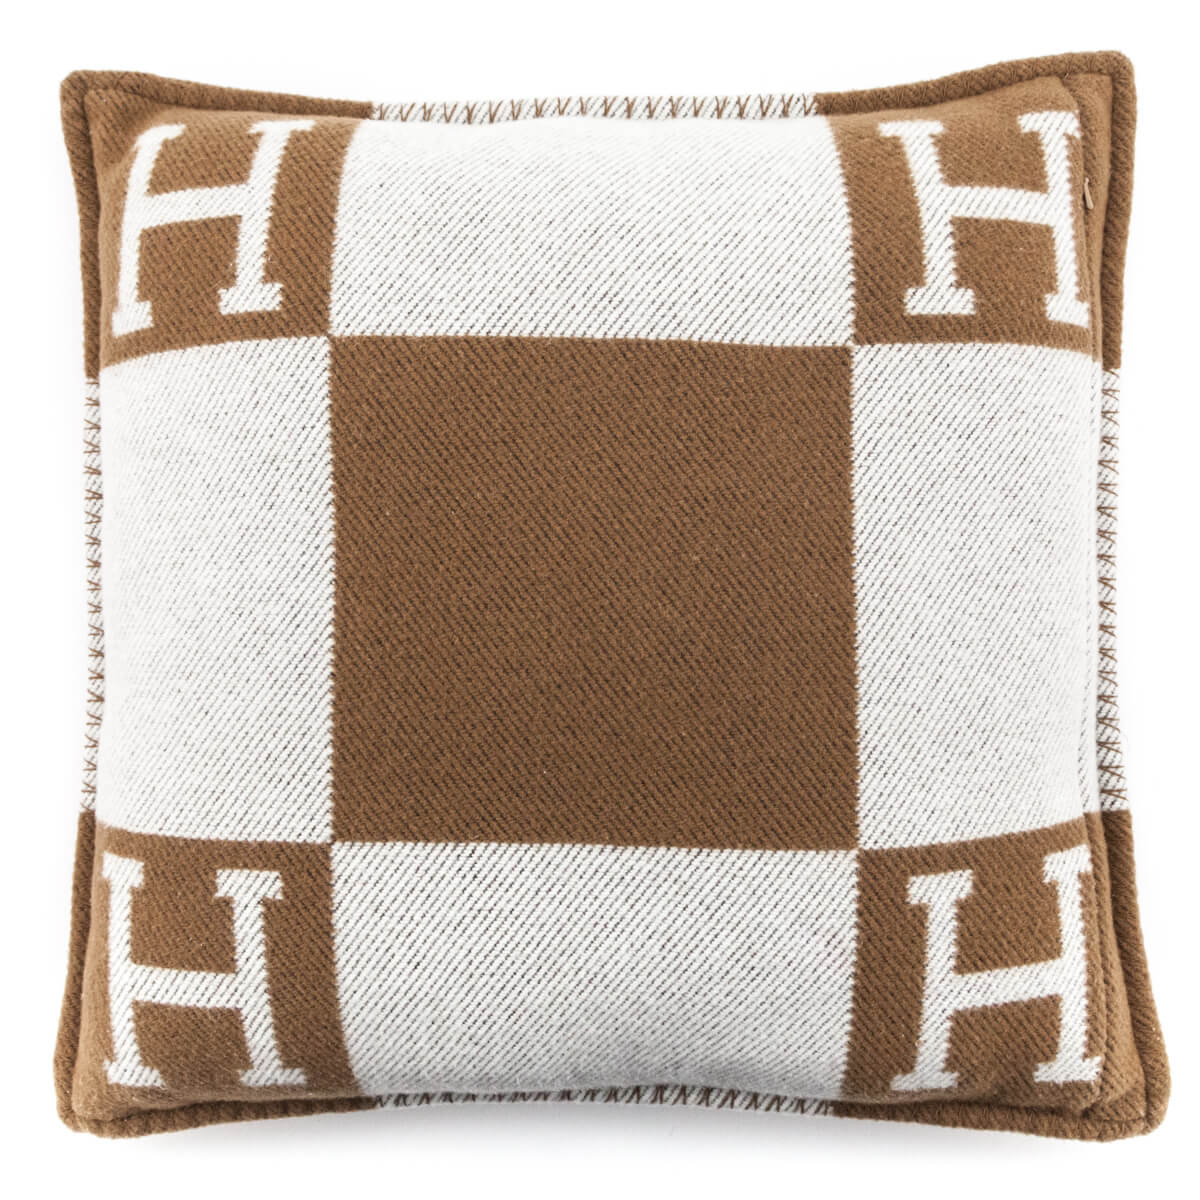 Hermes Brown & Creme Avalon Wool & Cashmere Throw Pillow - Love that Bag etc - Preowned Authentic Designer Handbags & Preloved Fashions